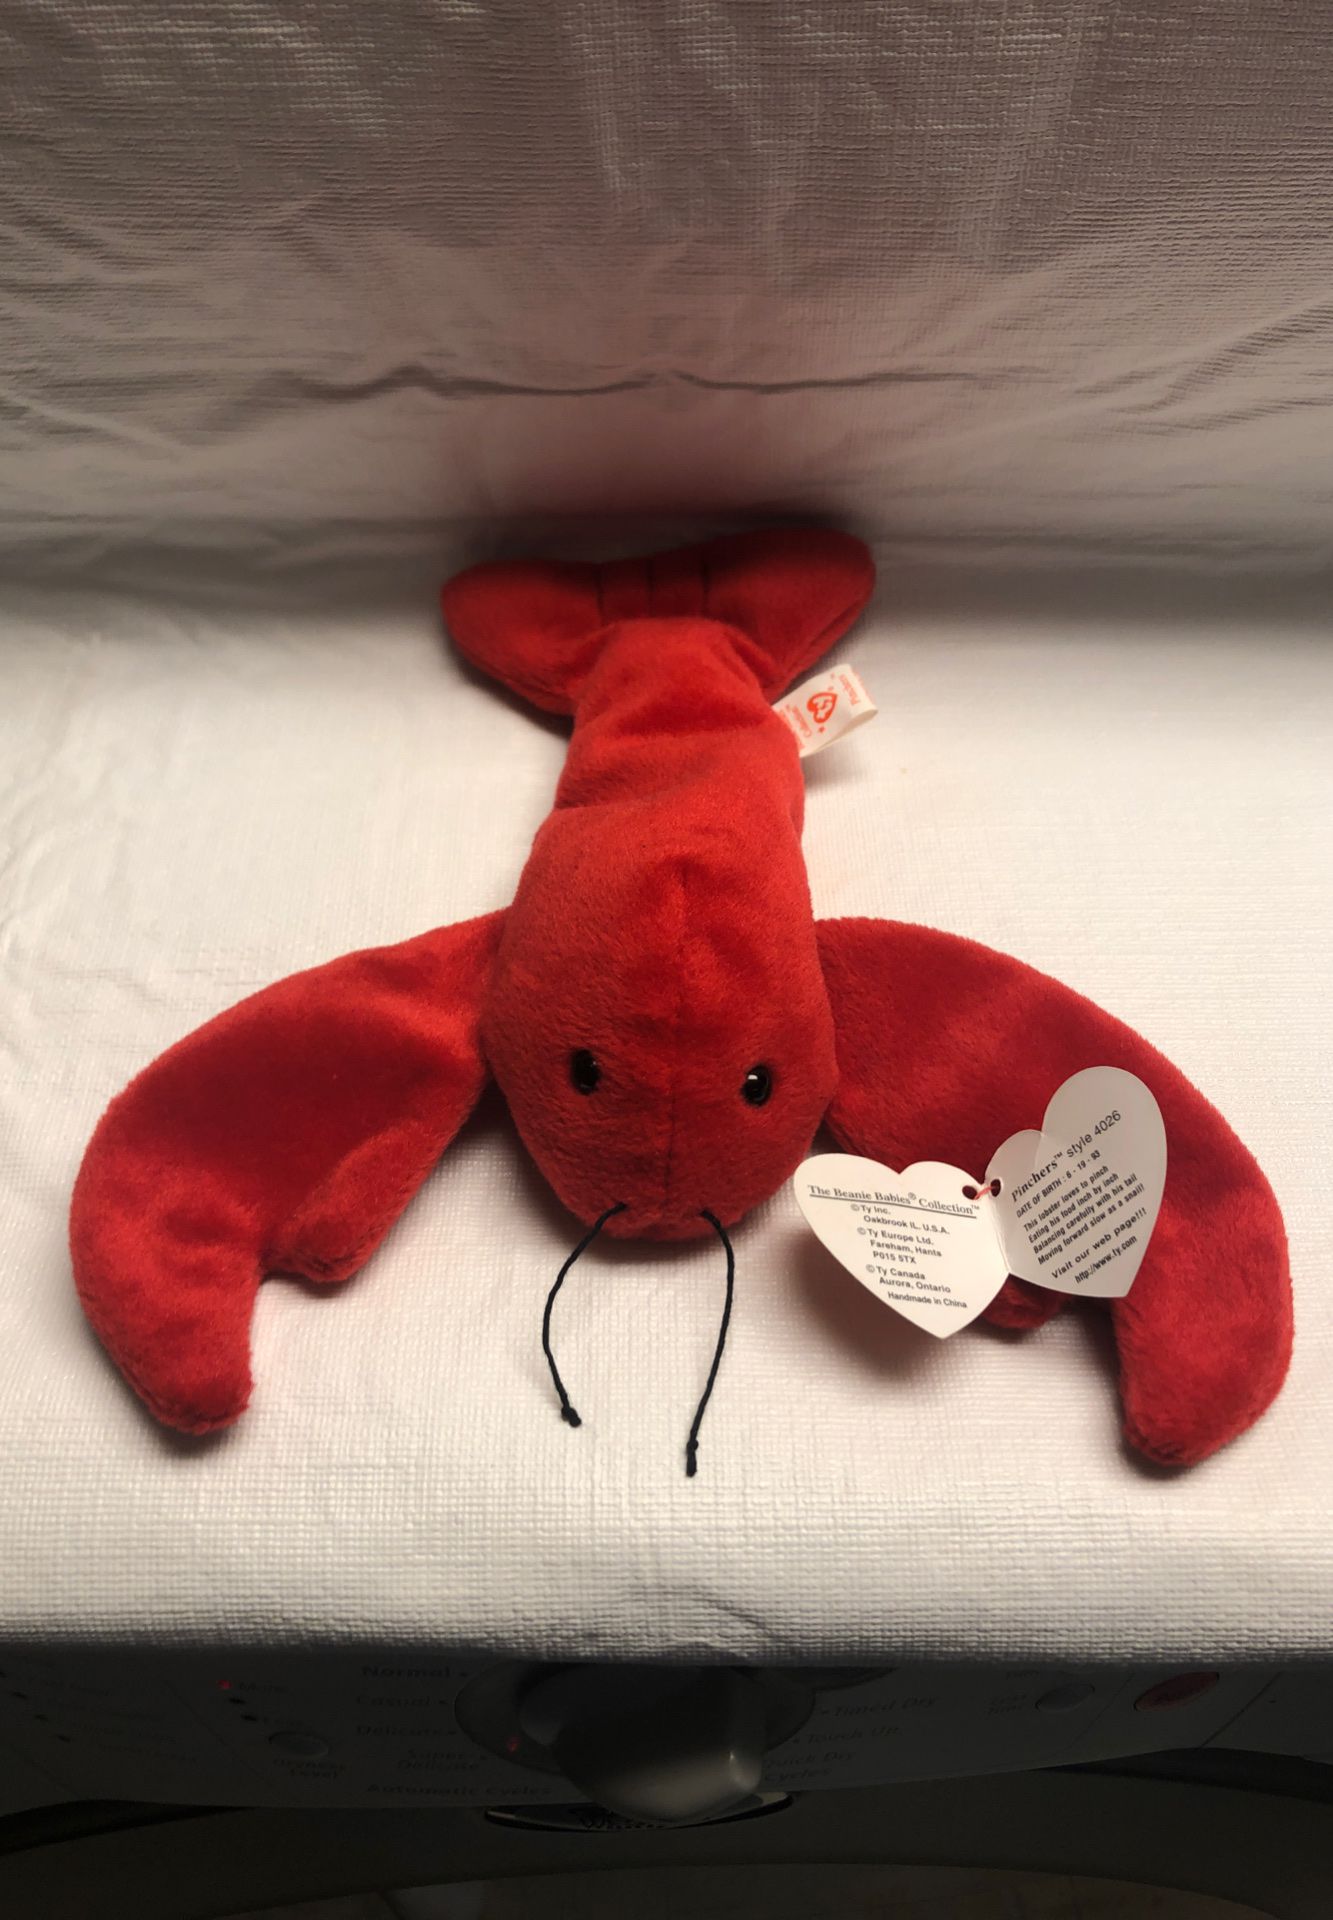 Pinches The Lobster, TY Beanie Baby